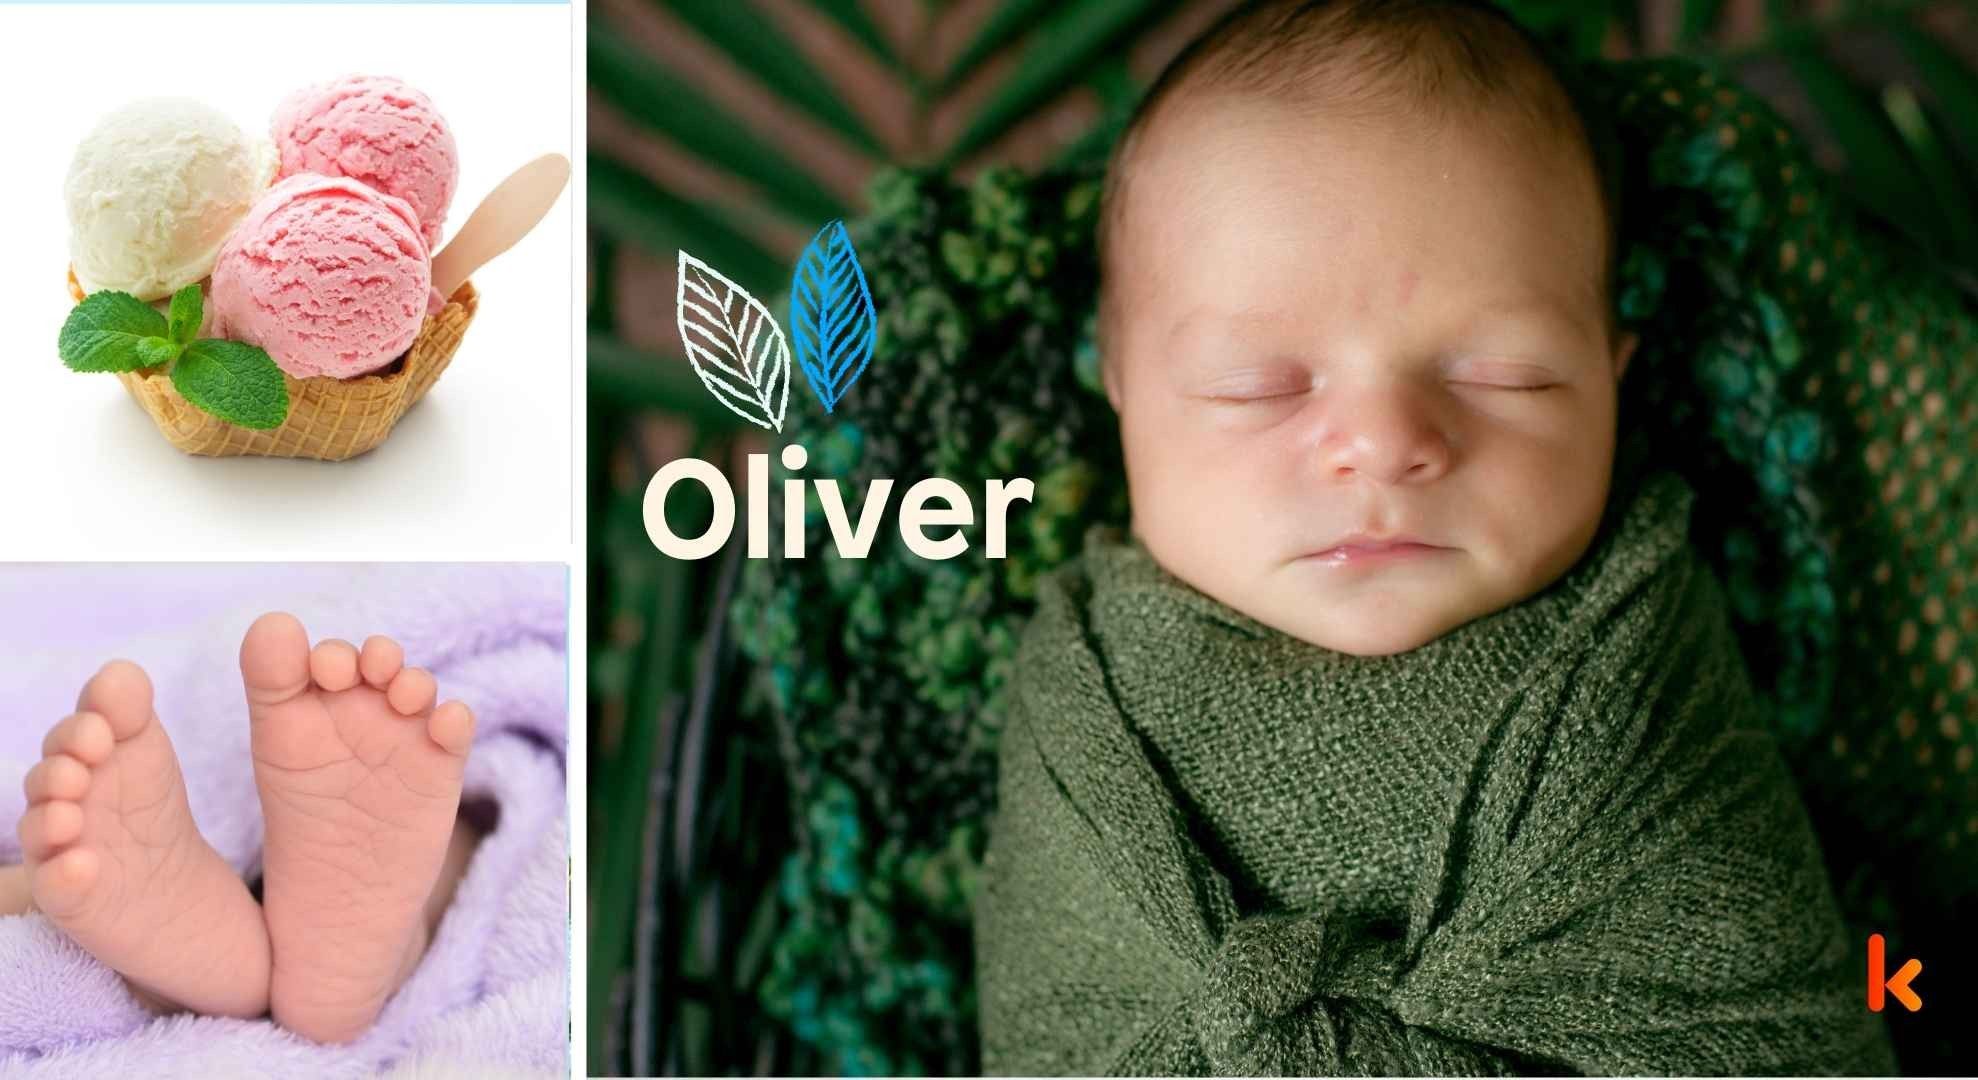 Baby name Oliver - cute baby, icecream, foot